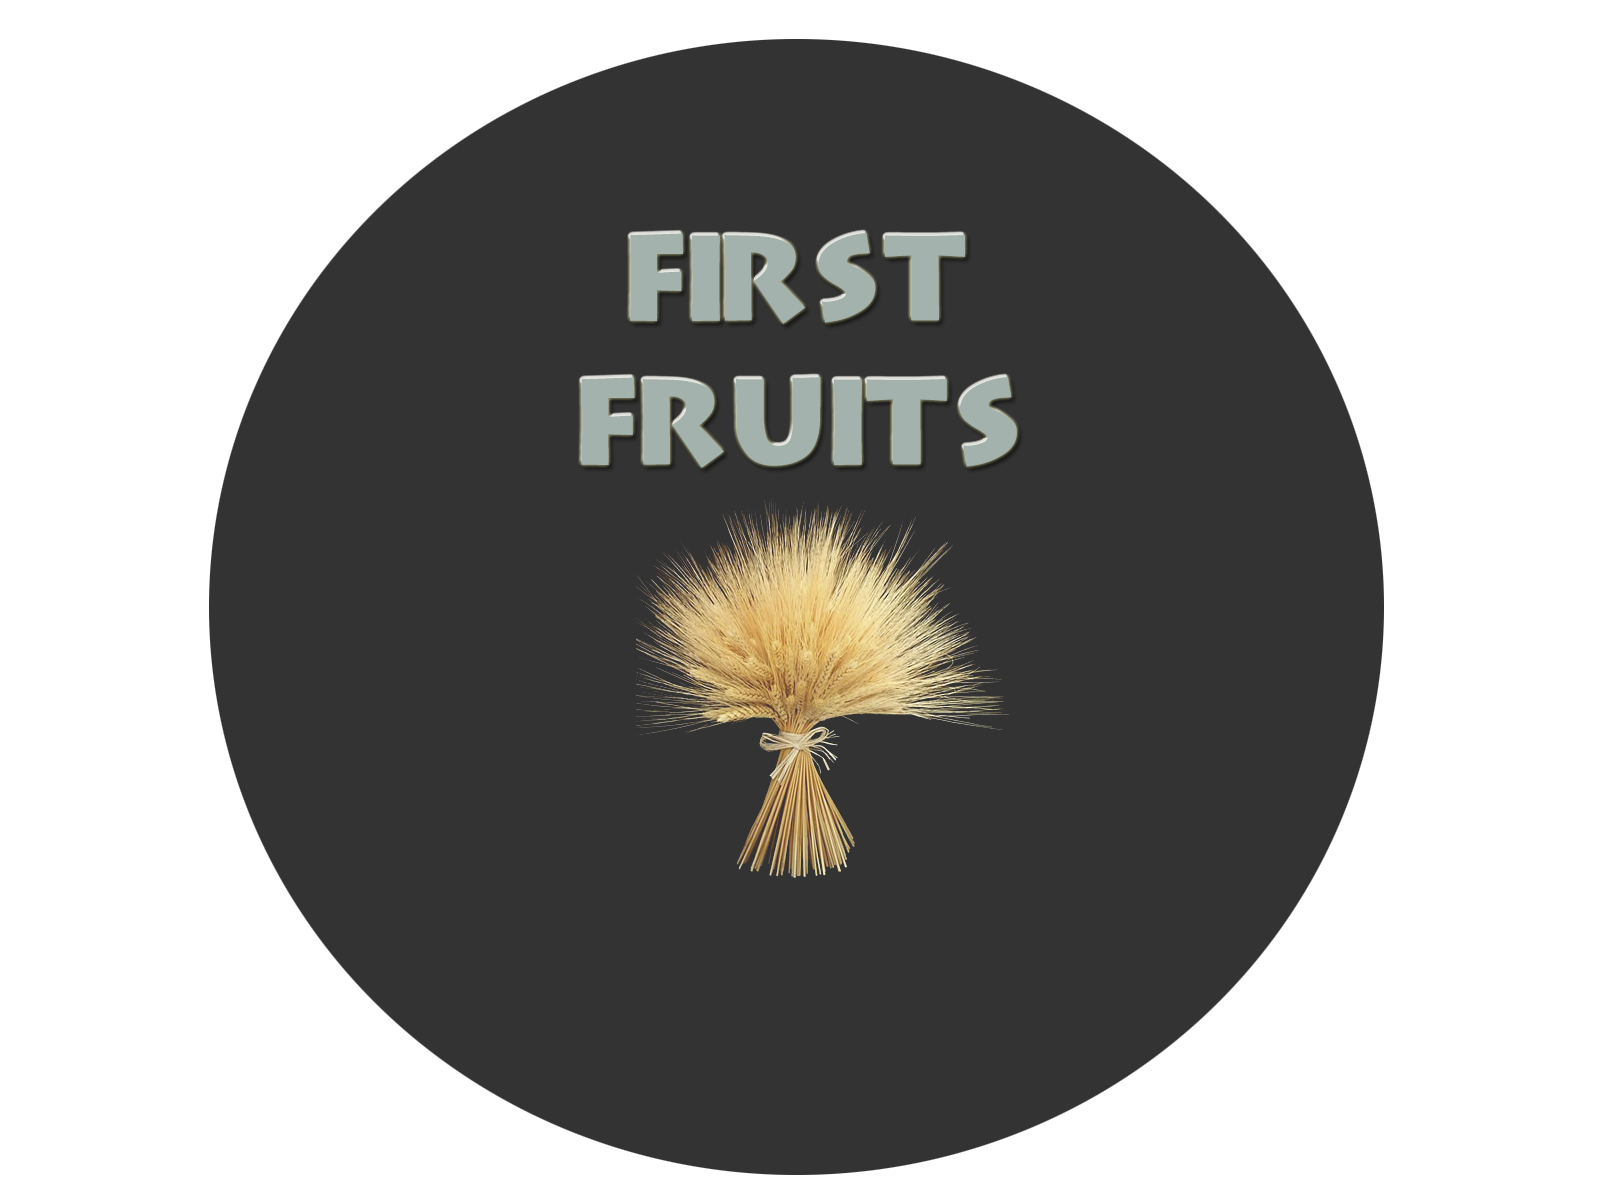 Feast of First Fruits